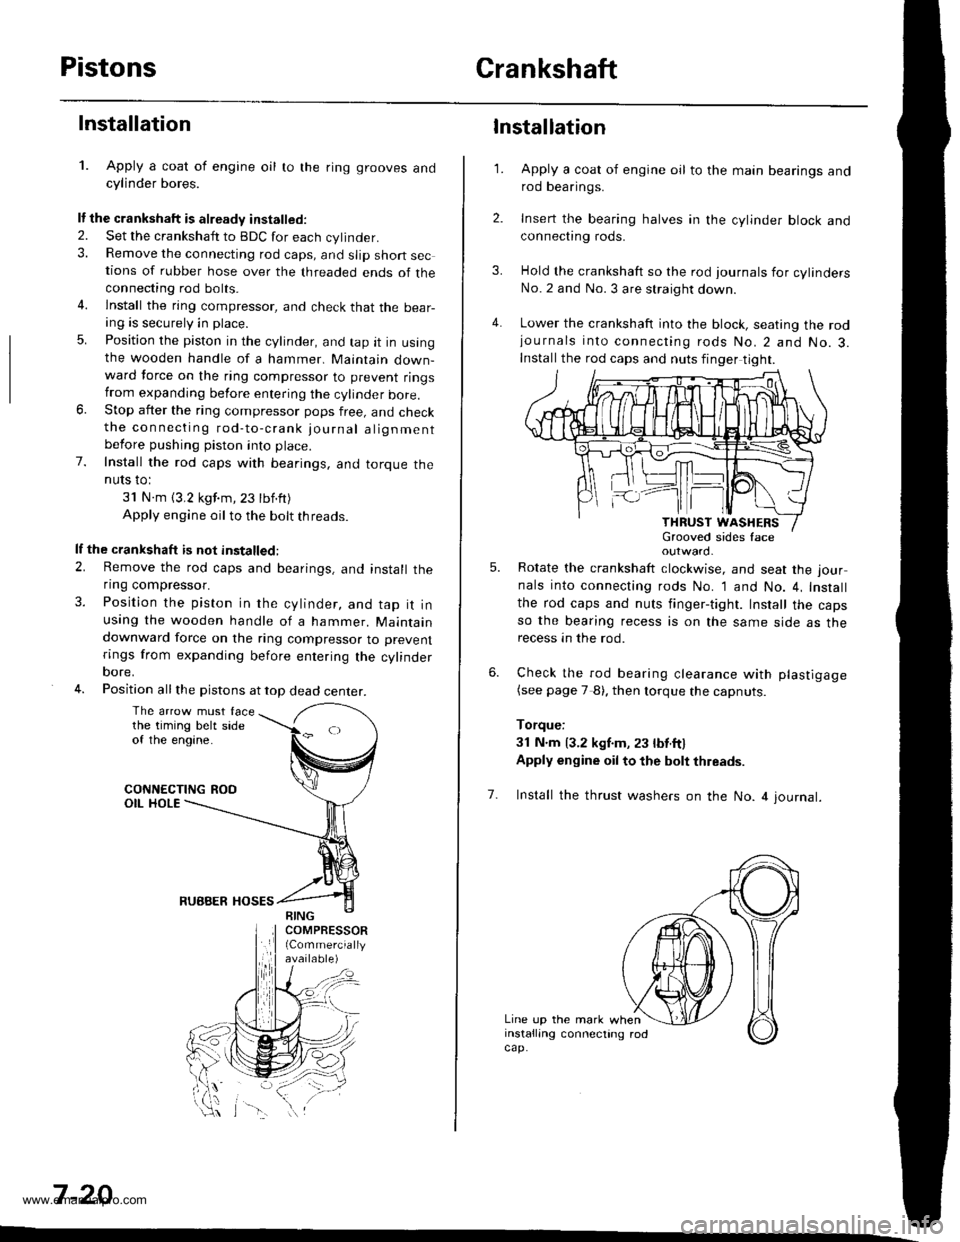 HONDA CR-V 2000 RD1-RD3 / 1.G Owners Manual 
PistonsCrankshaft
Installation
1. Apply a coat of engine oil to the ring grooves andcylinder bores.
It the crankshaft is already installed.
2. Set the crankshatt to BDC for each cylinder.3. Remove th